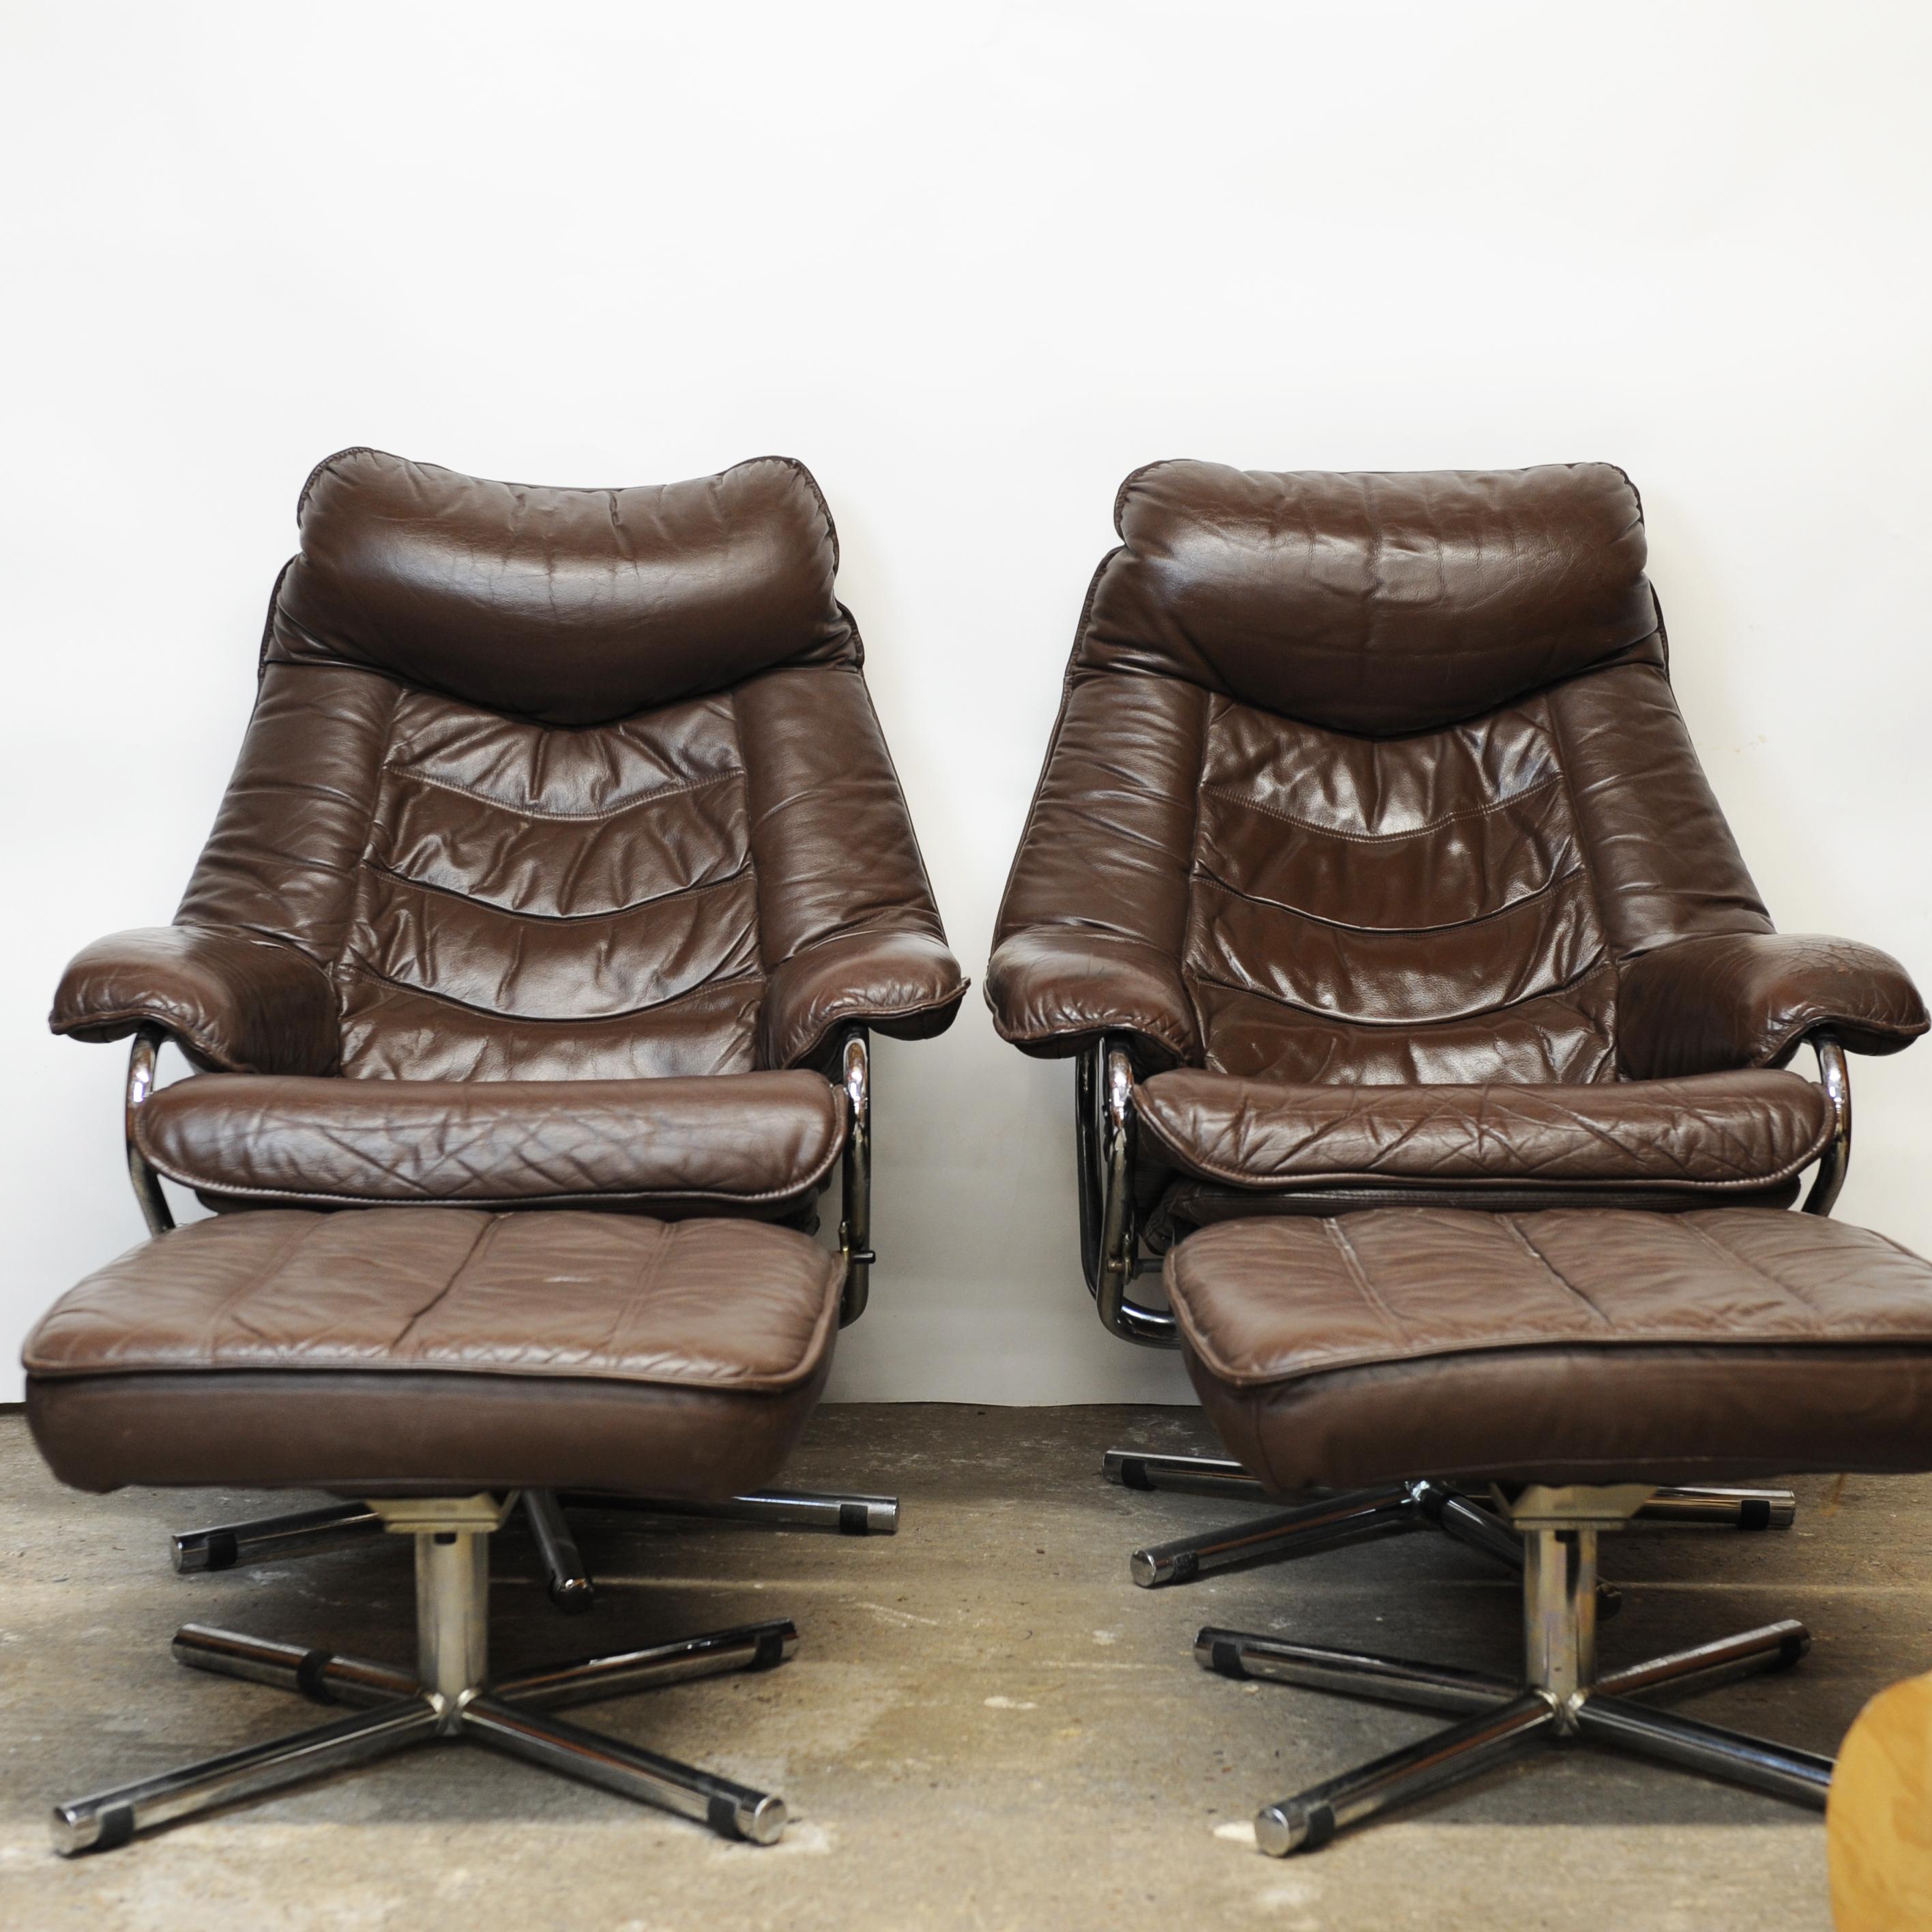 Pair of Norwegian Lounge Chairs with Footstools in Brown Leather by Skoghaus  For Sale 5